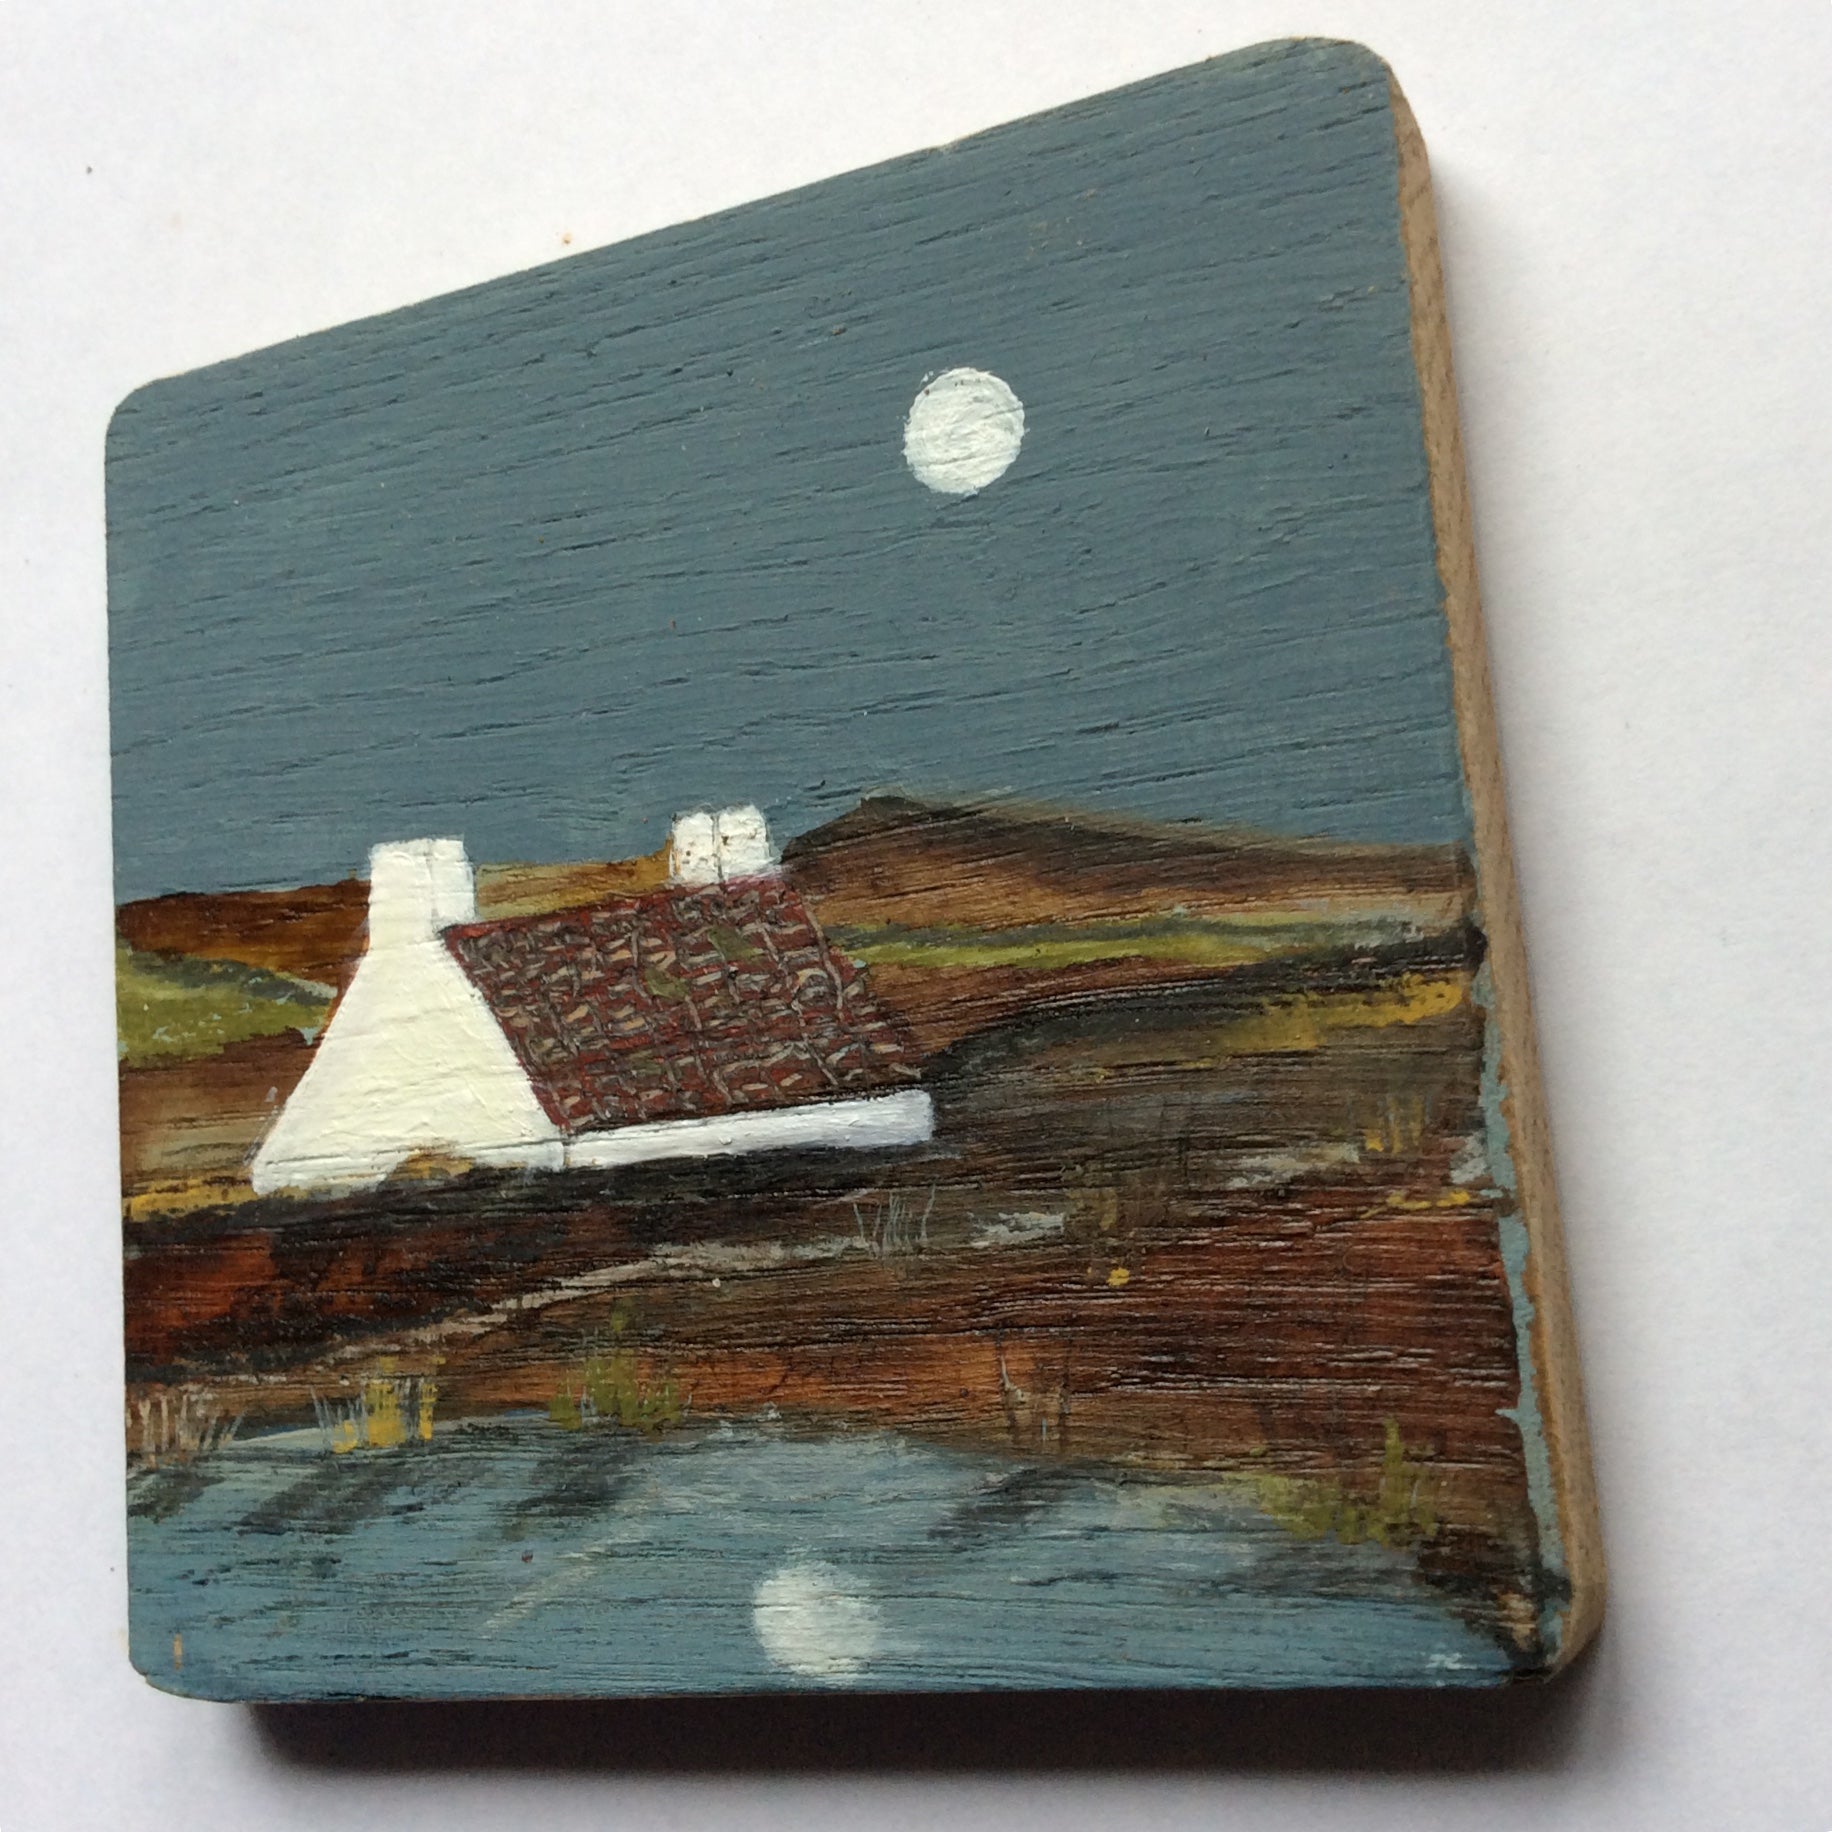 Mixed Media Art on wood By Louise O'Hara - "The old Croft house with the red tiled roof”